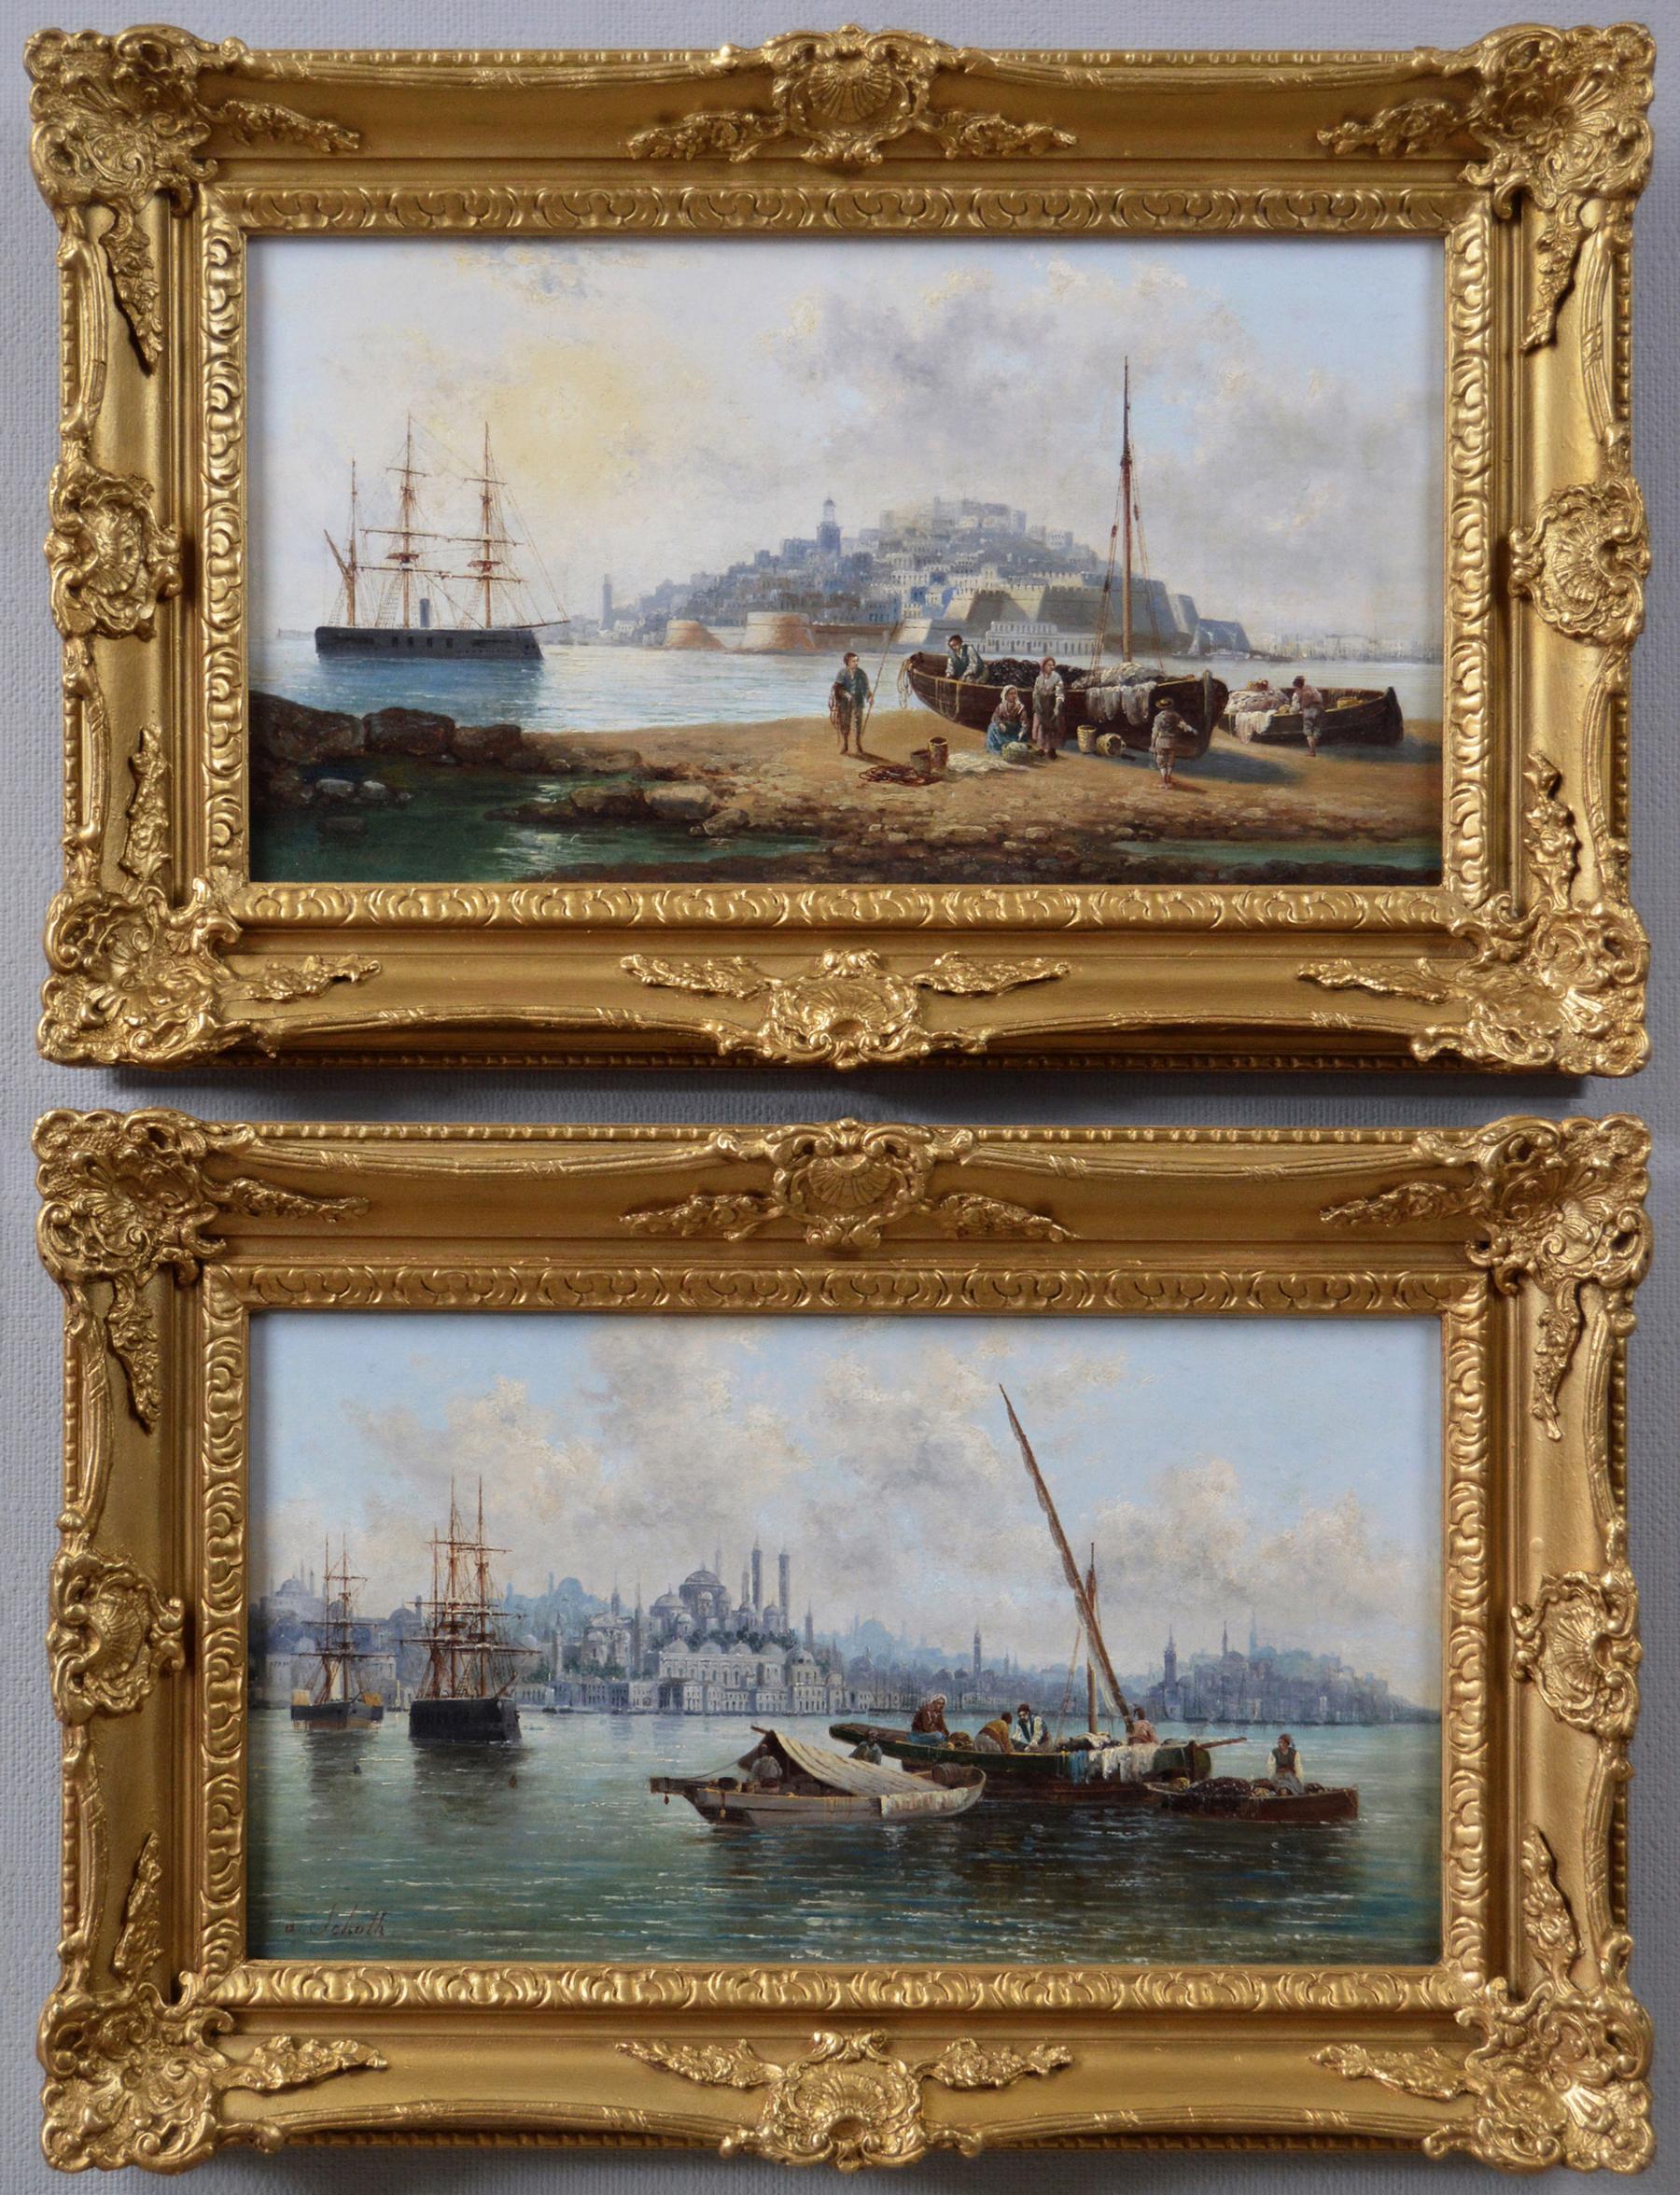 Anton Schoth Landscape Painting - Pair of 19th Century seascape oil paintings of Malta & Constantinople (Istanbul)